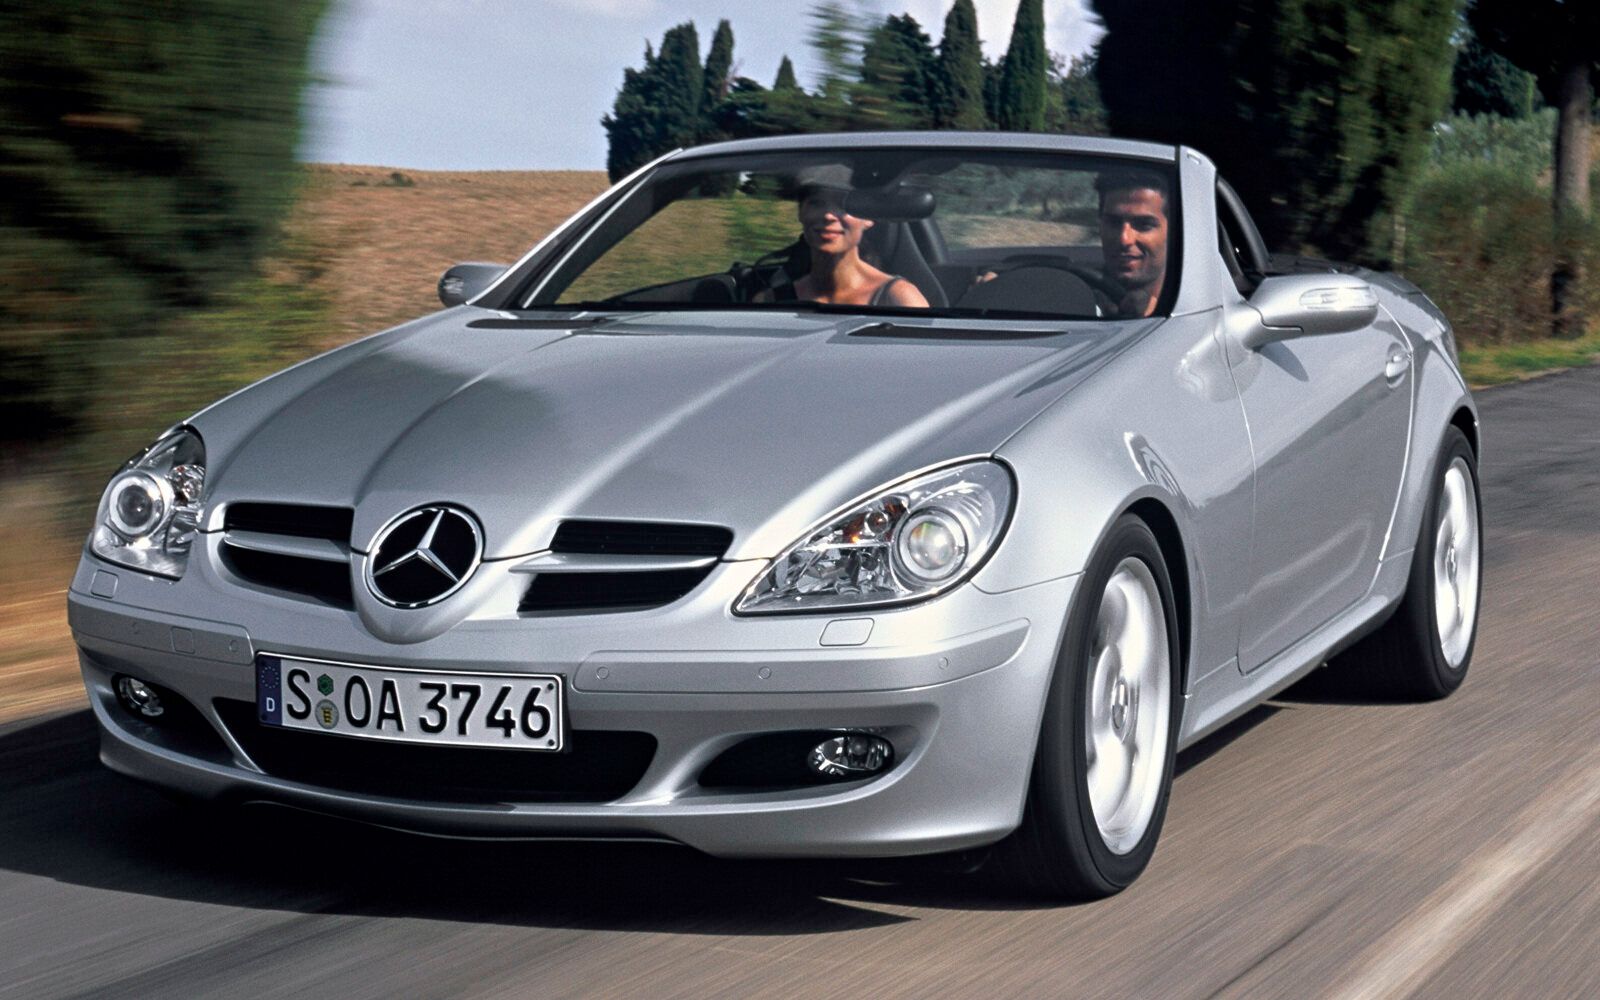 Mercedes-Benz SLK convertible on the highway